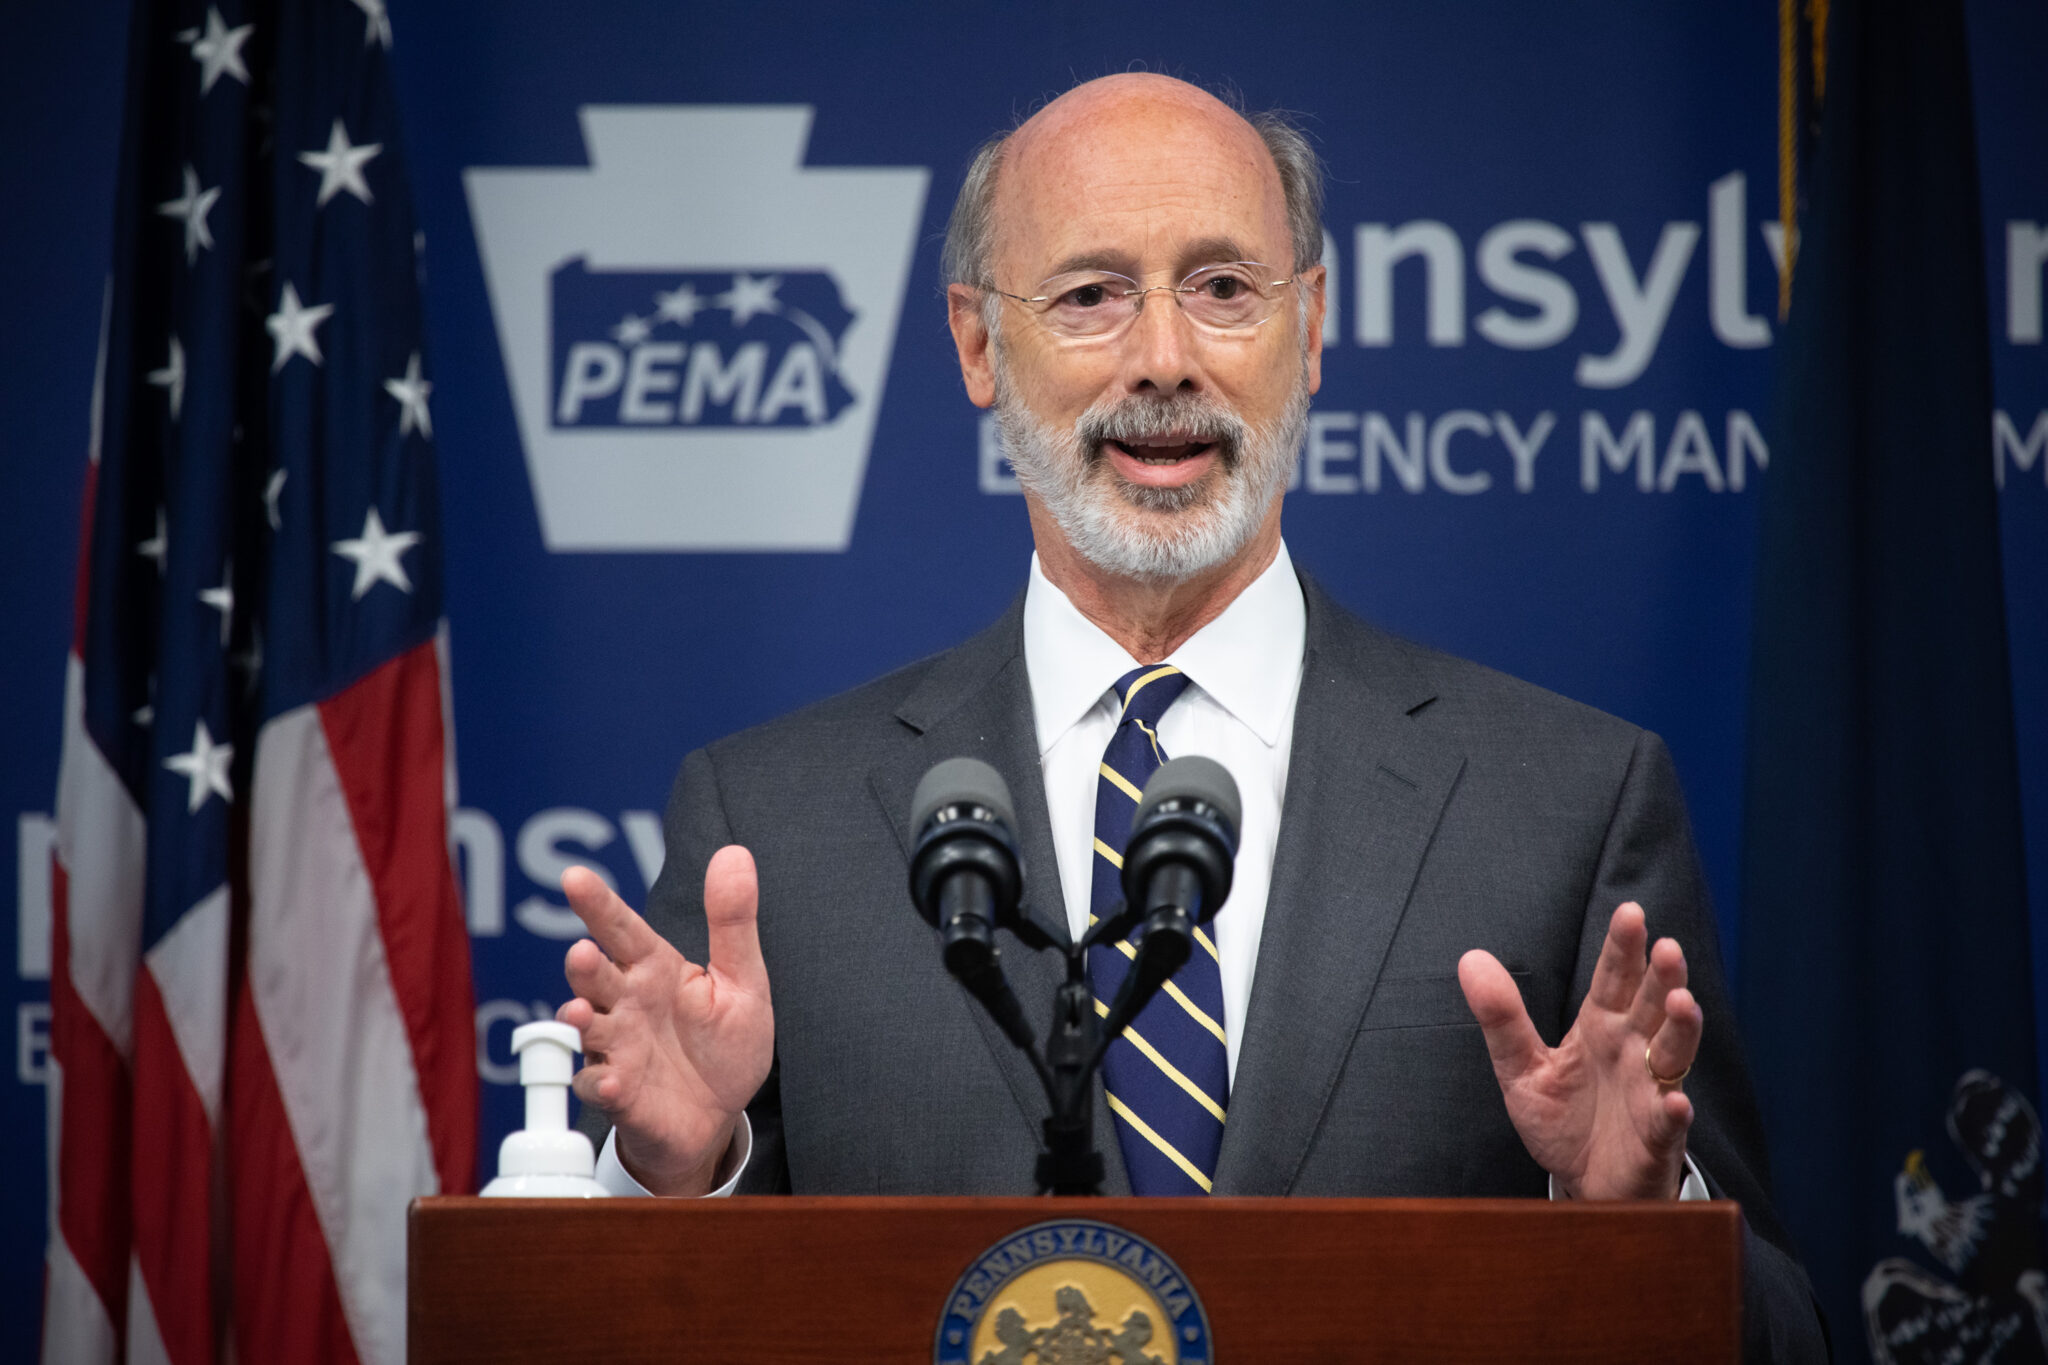 Gov. Wolf Could Soon Expand Vaccine Eligibilty